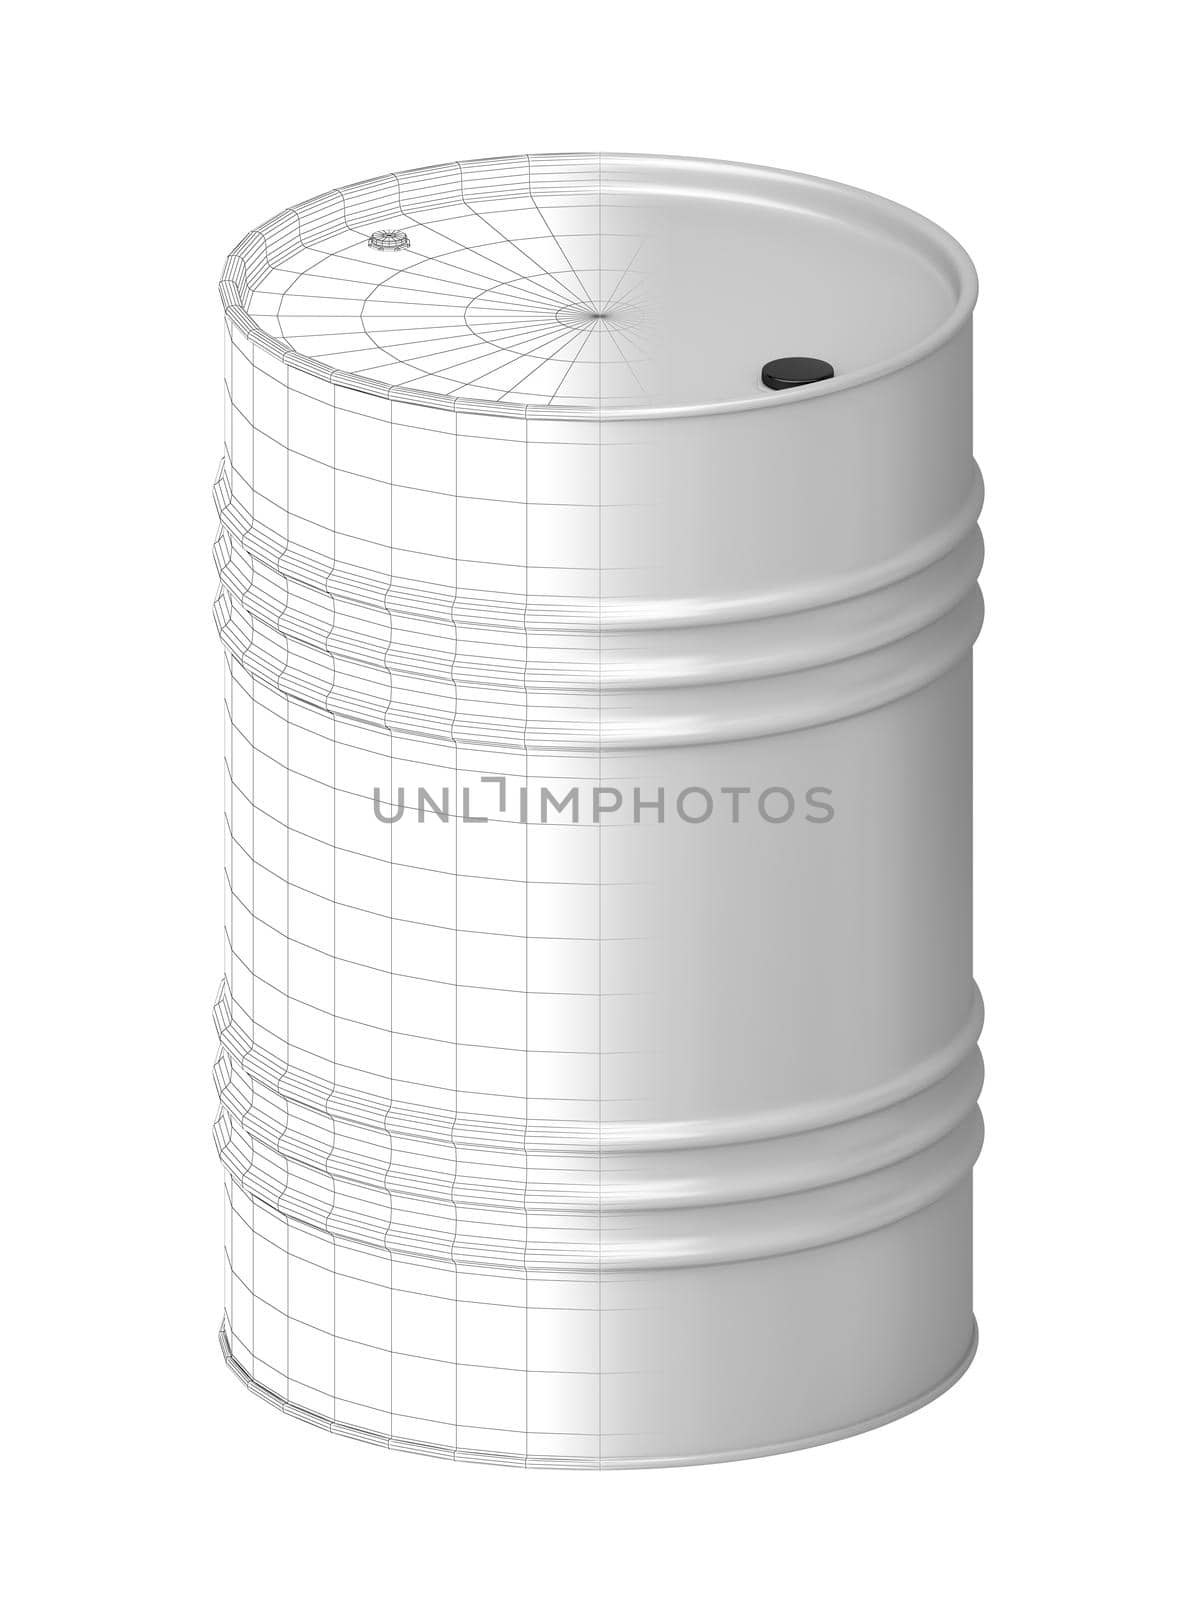 3D model of oil drum by magraphics